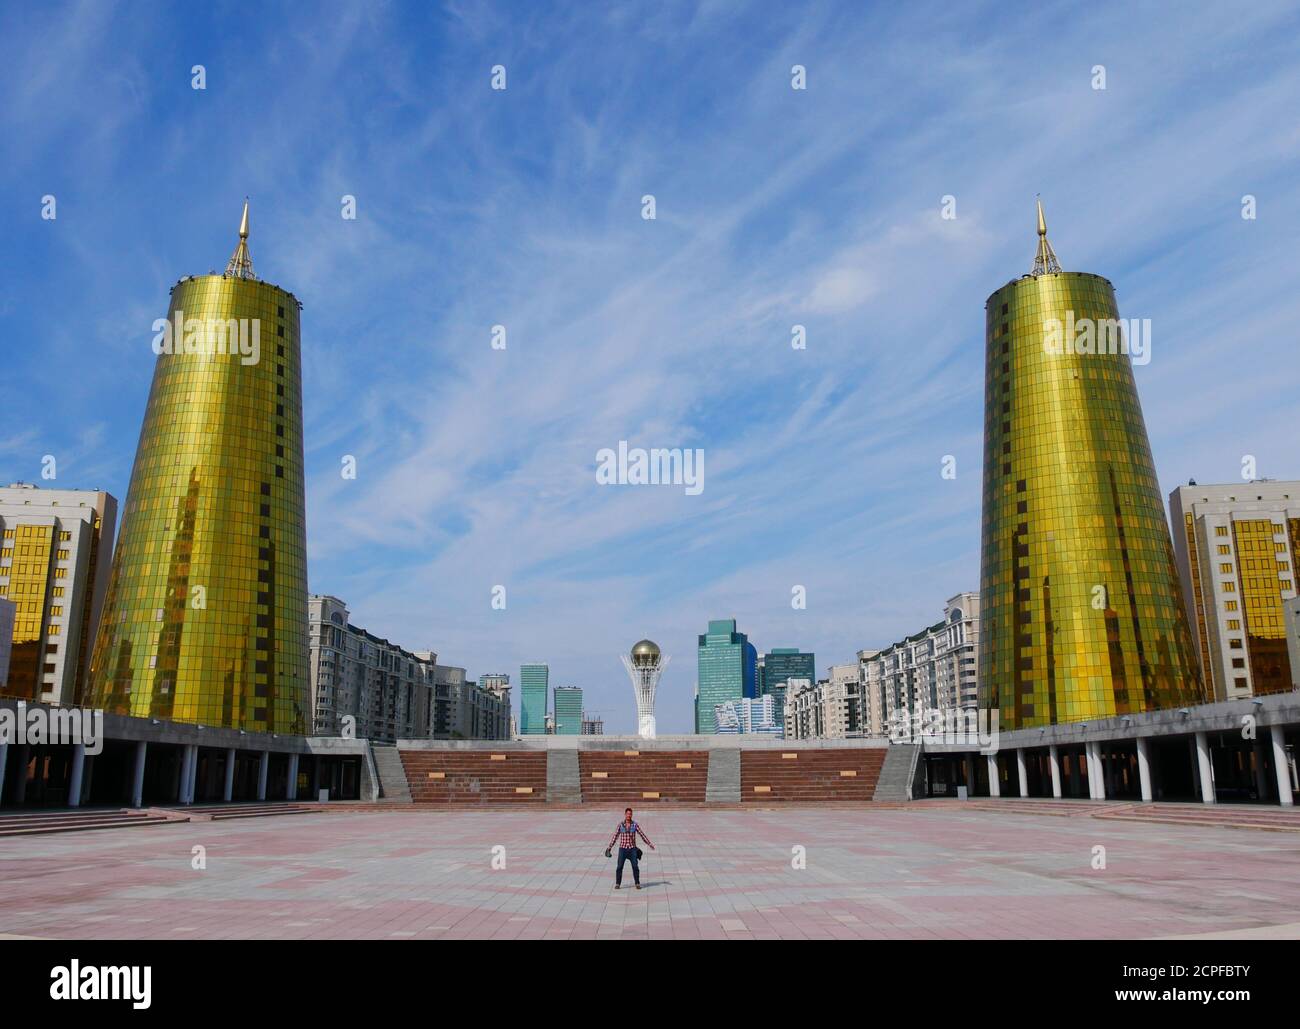 Nur-Sultan, Kazakhstan - 2 Sep 2019: A man stands on a city square in Nur-Sultan's (Astana's) city center with the city skyline in the background. Stock Photo